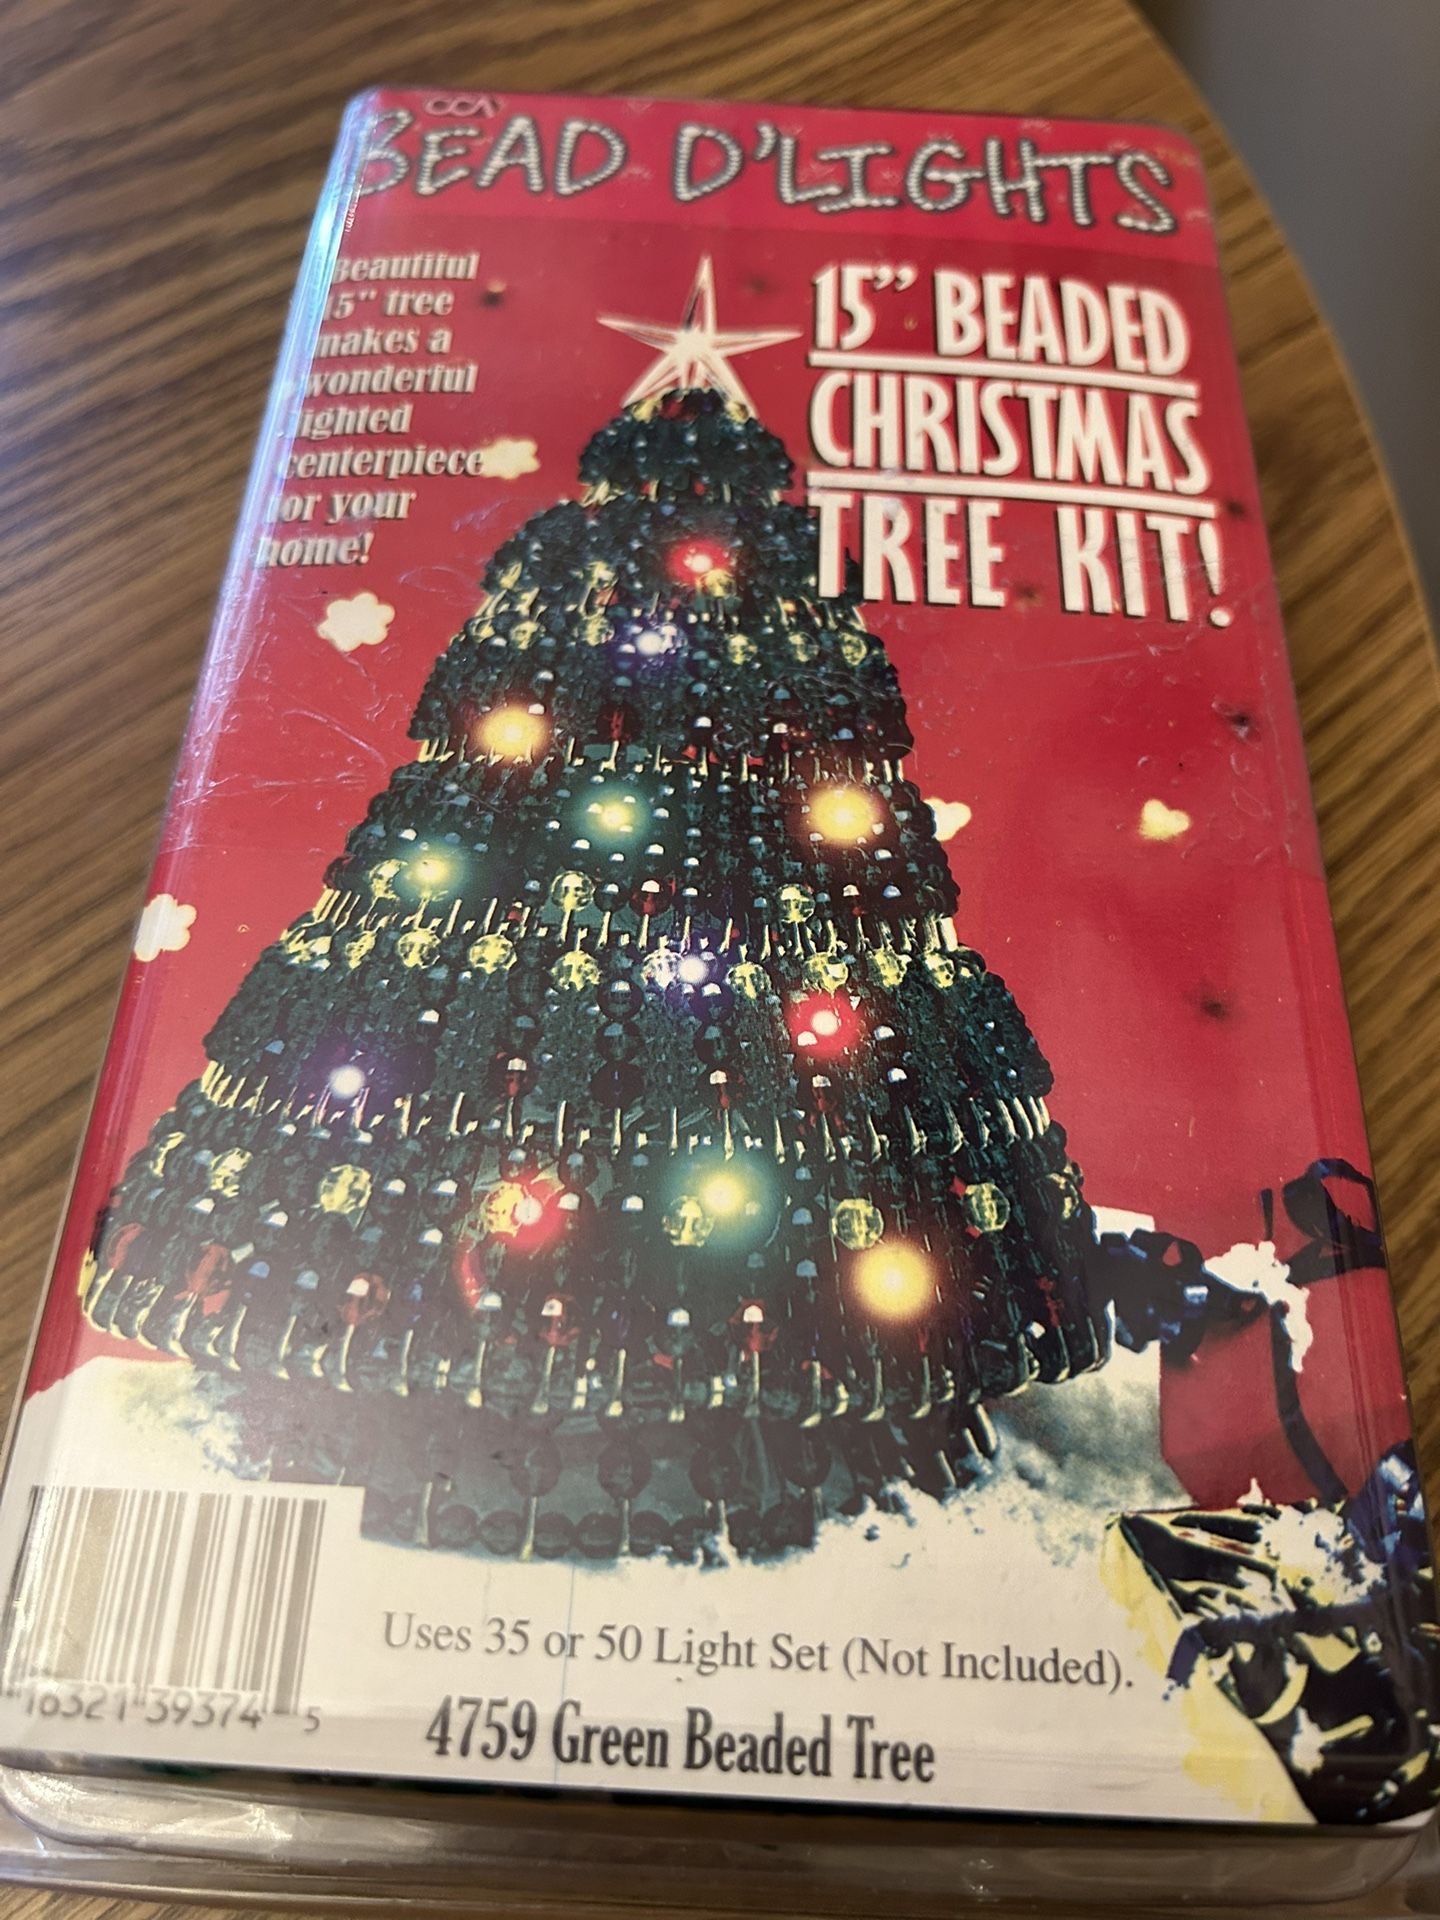 Vintage Bead D'lights 15" Beaded Christmas Tree Kit New / open package complete 